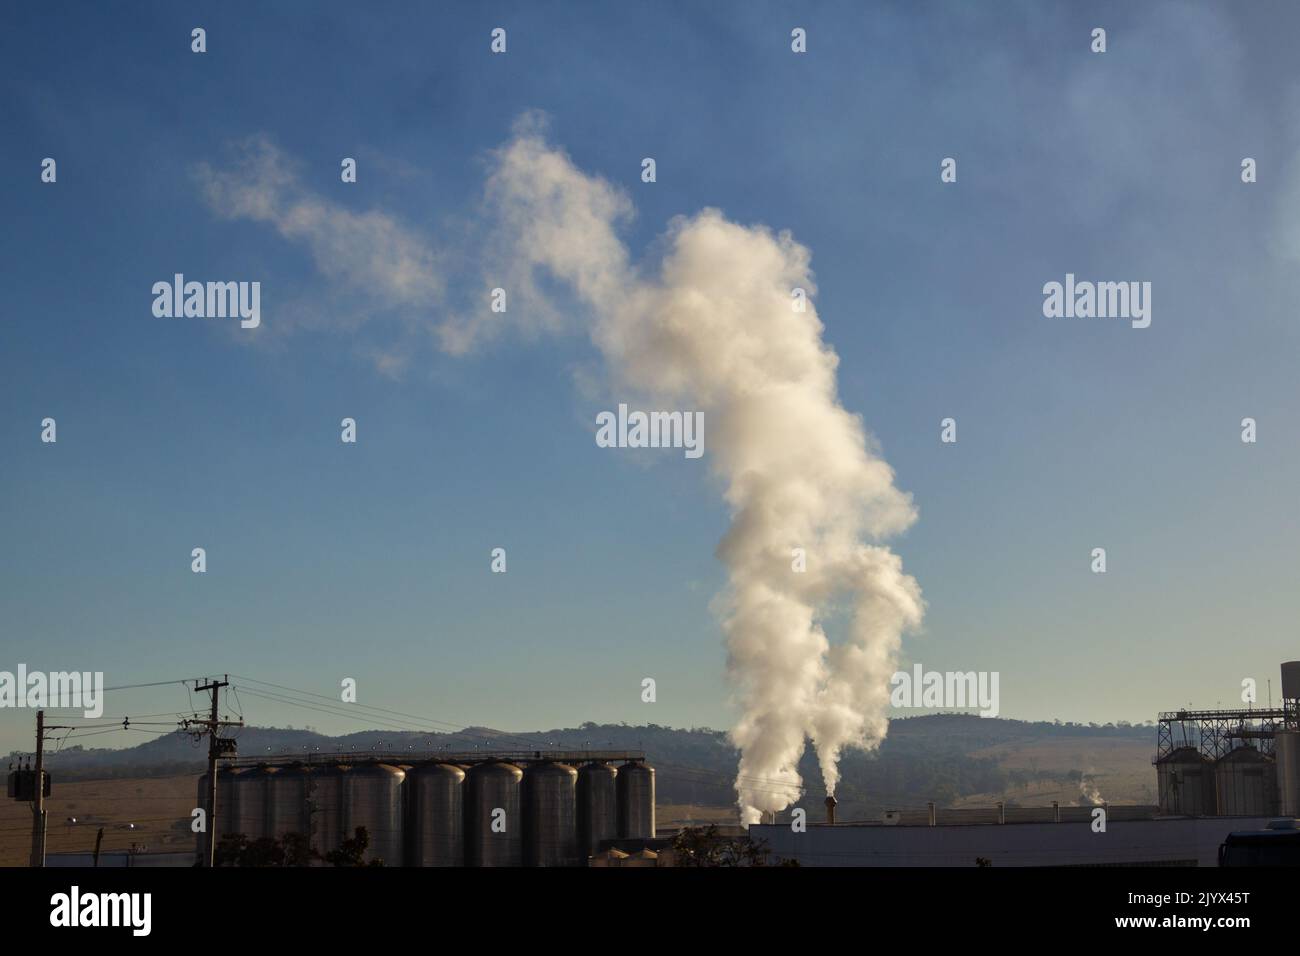 Goiânia, Goias, Brazil – December 25, 2021: Smoke coming out of the factory chimney. Air pollution from smoke coming out of factory chimneys. Stock Photo